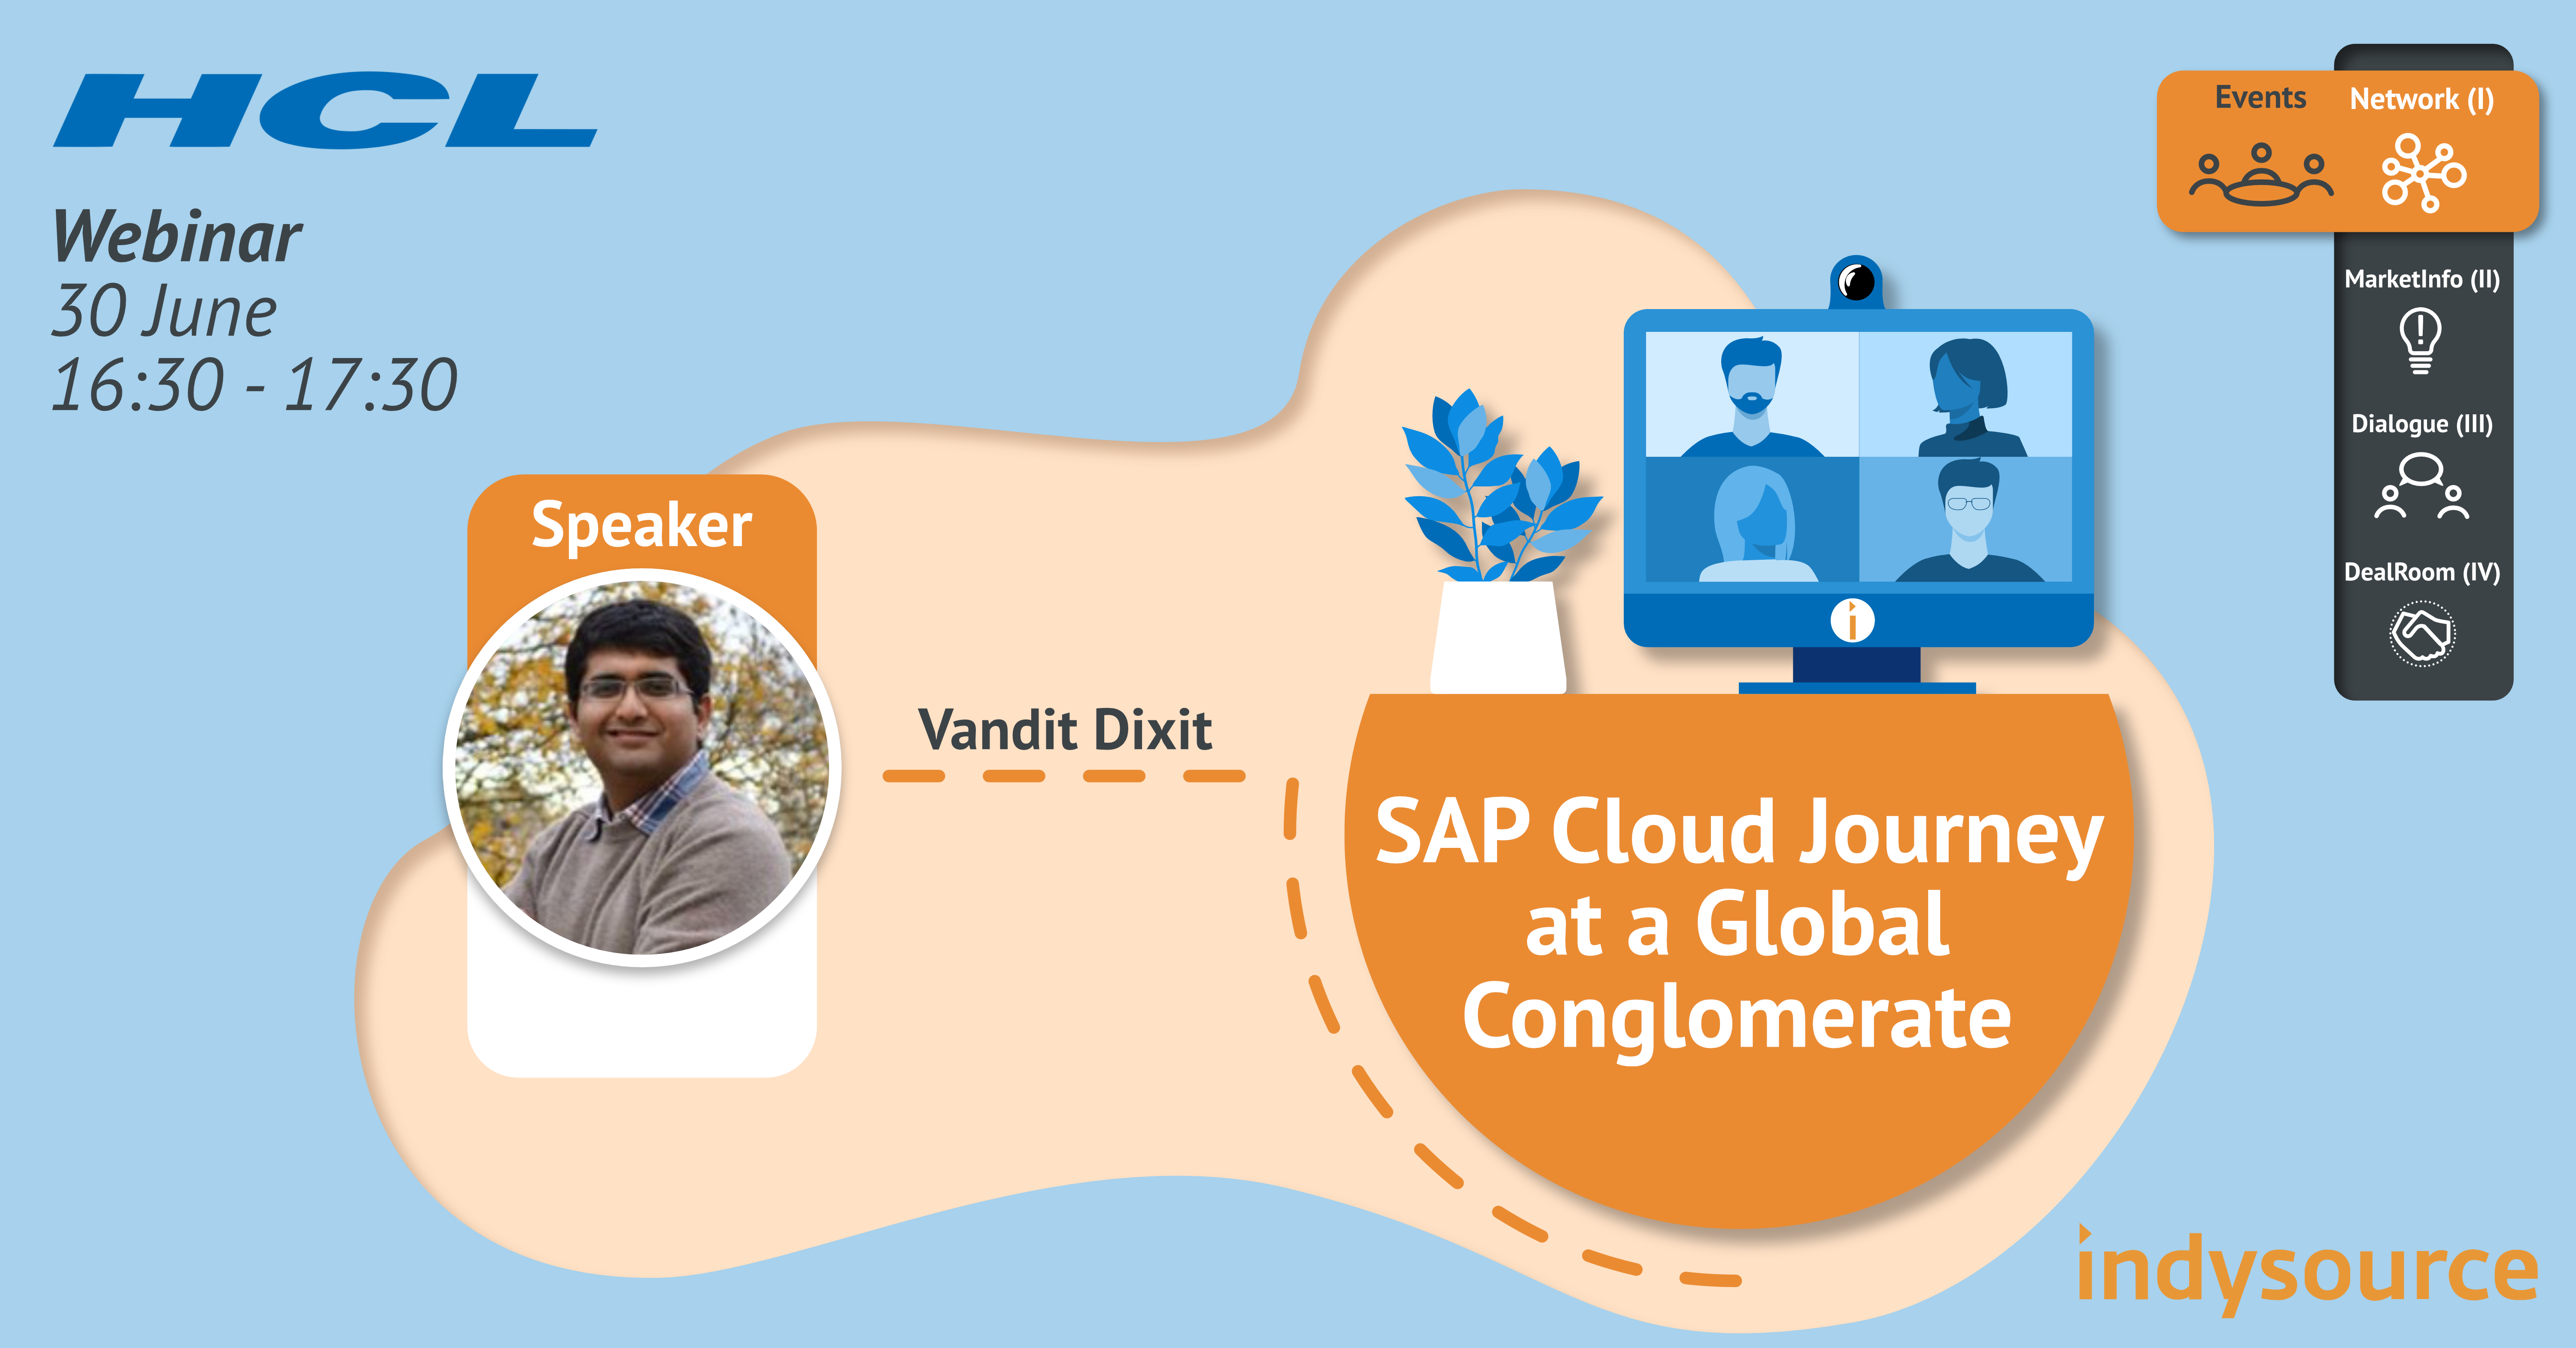 SAP Cloud Journey at a Global Conglomerate